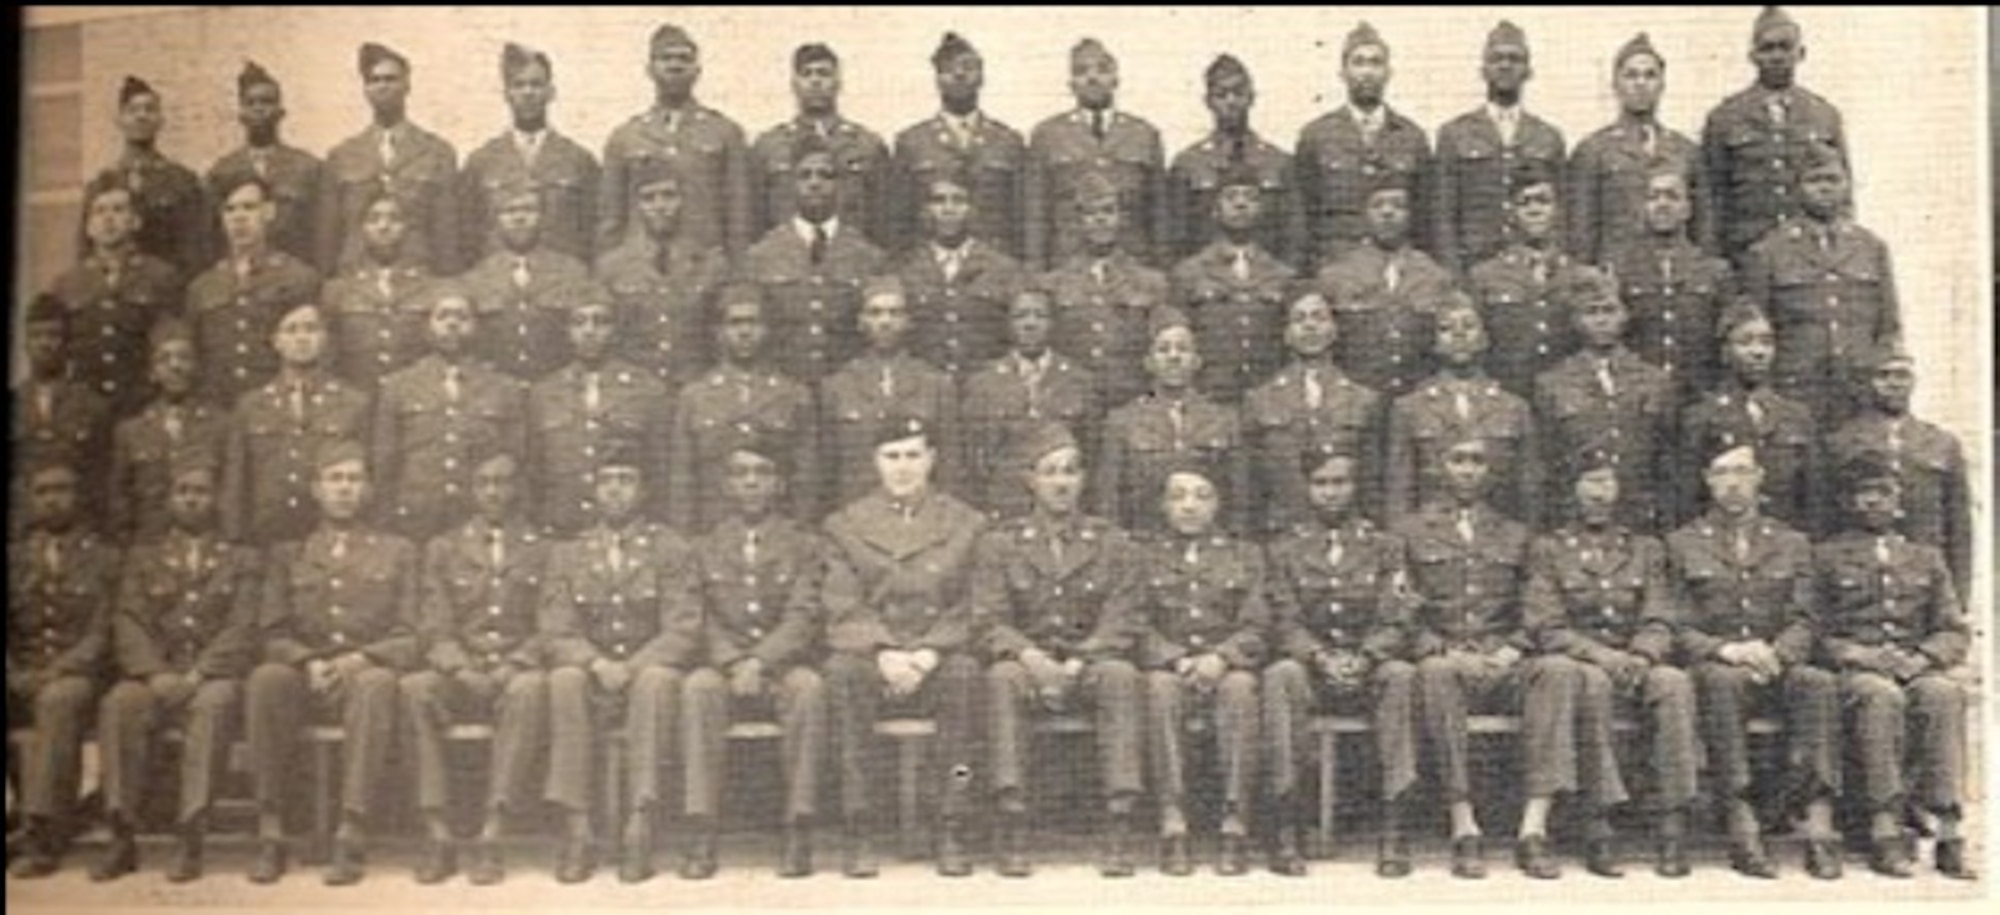 Buckley Field's First Graduating Class of African-American Armorers was in March 1943. Buckley Field conducted basic and technical training starting July 1, 1942, until Jan. 1, 1945.